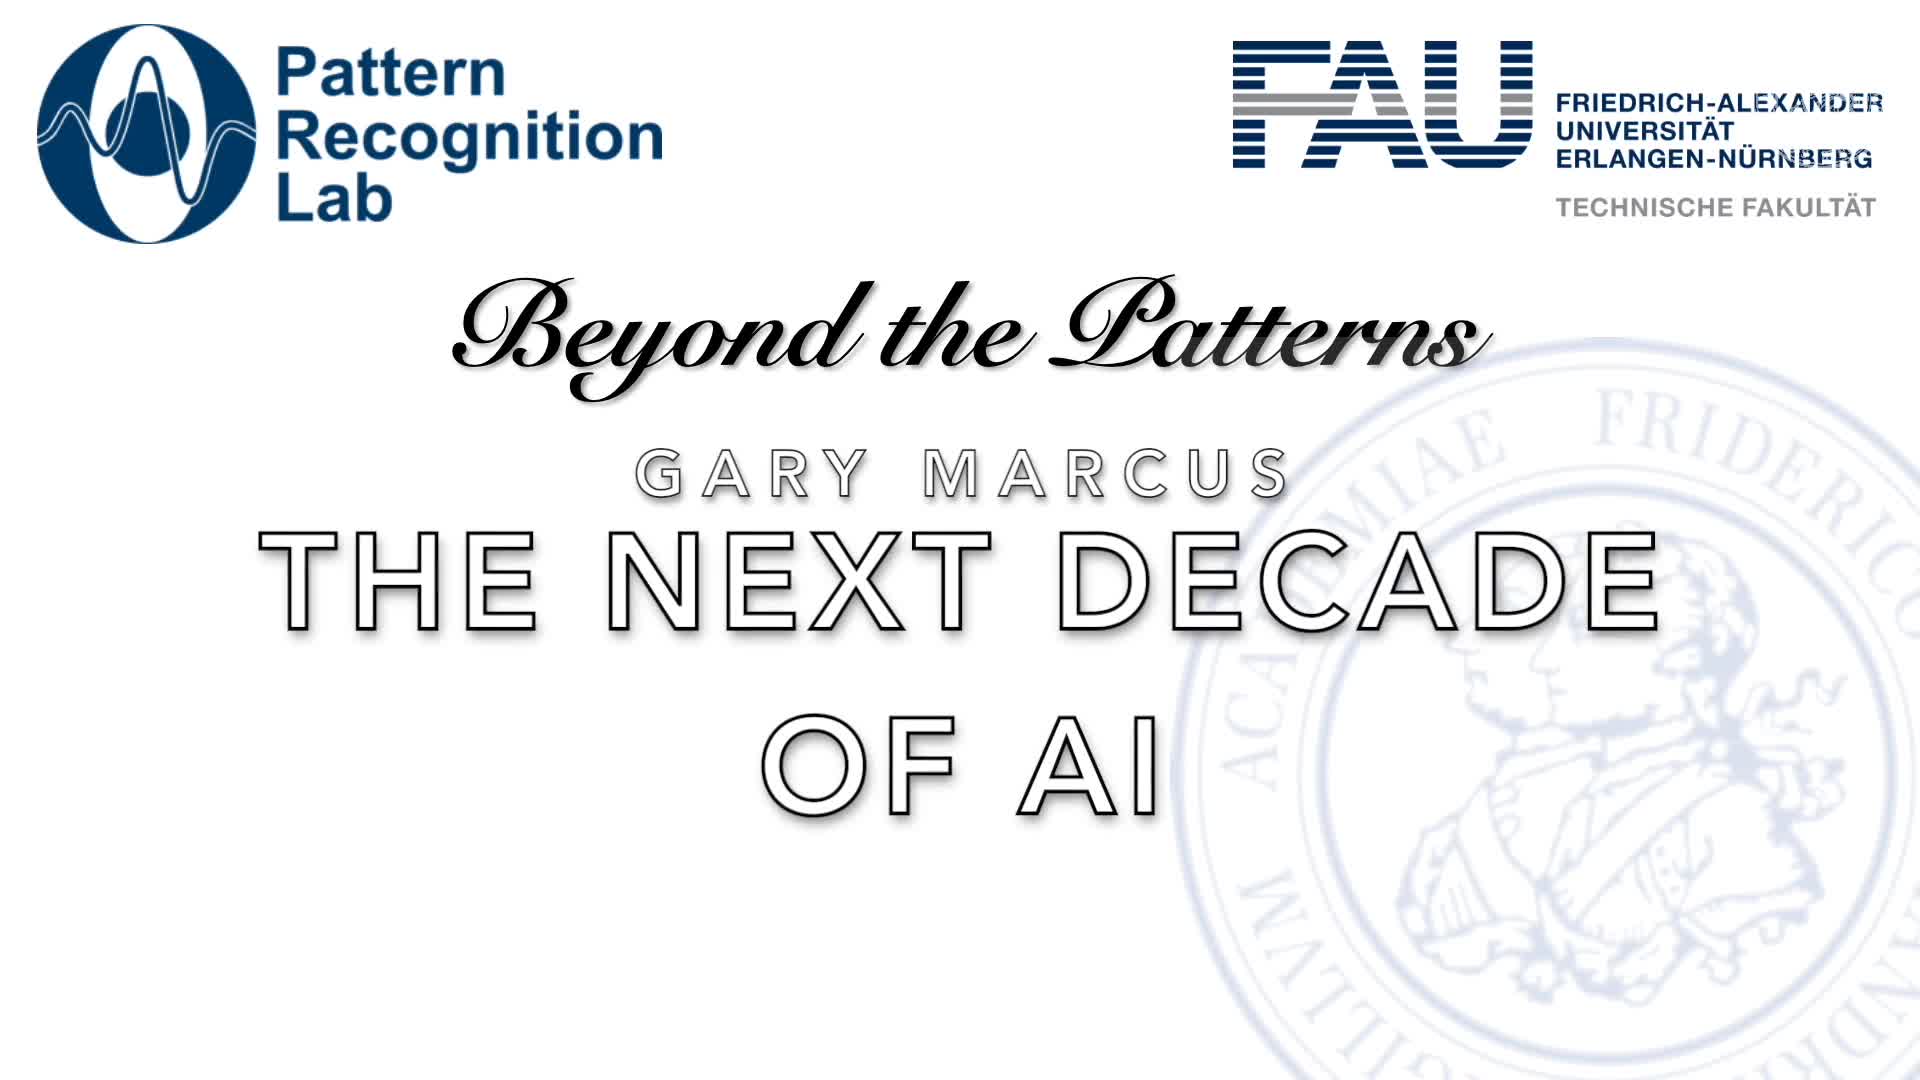 Beyond the Patterns - Gary Marcus - The Next Decade in AI preview image